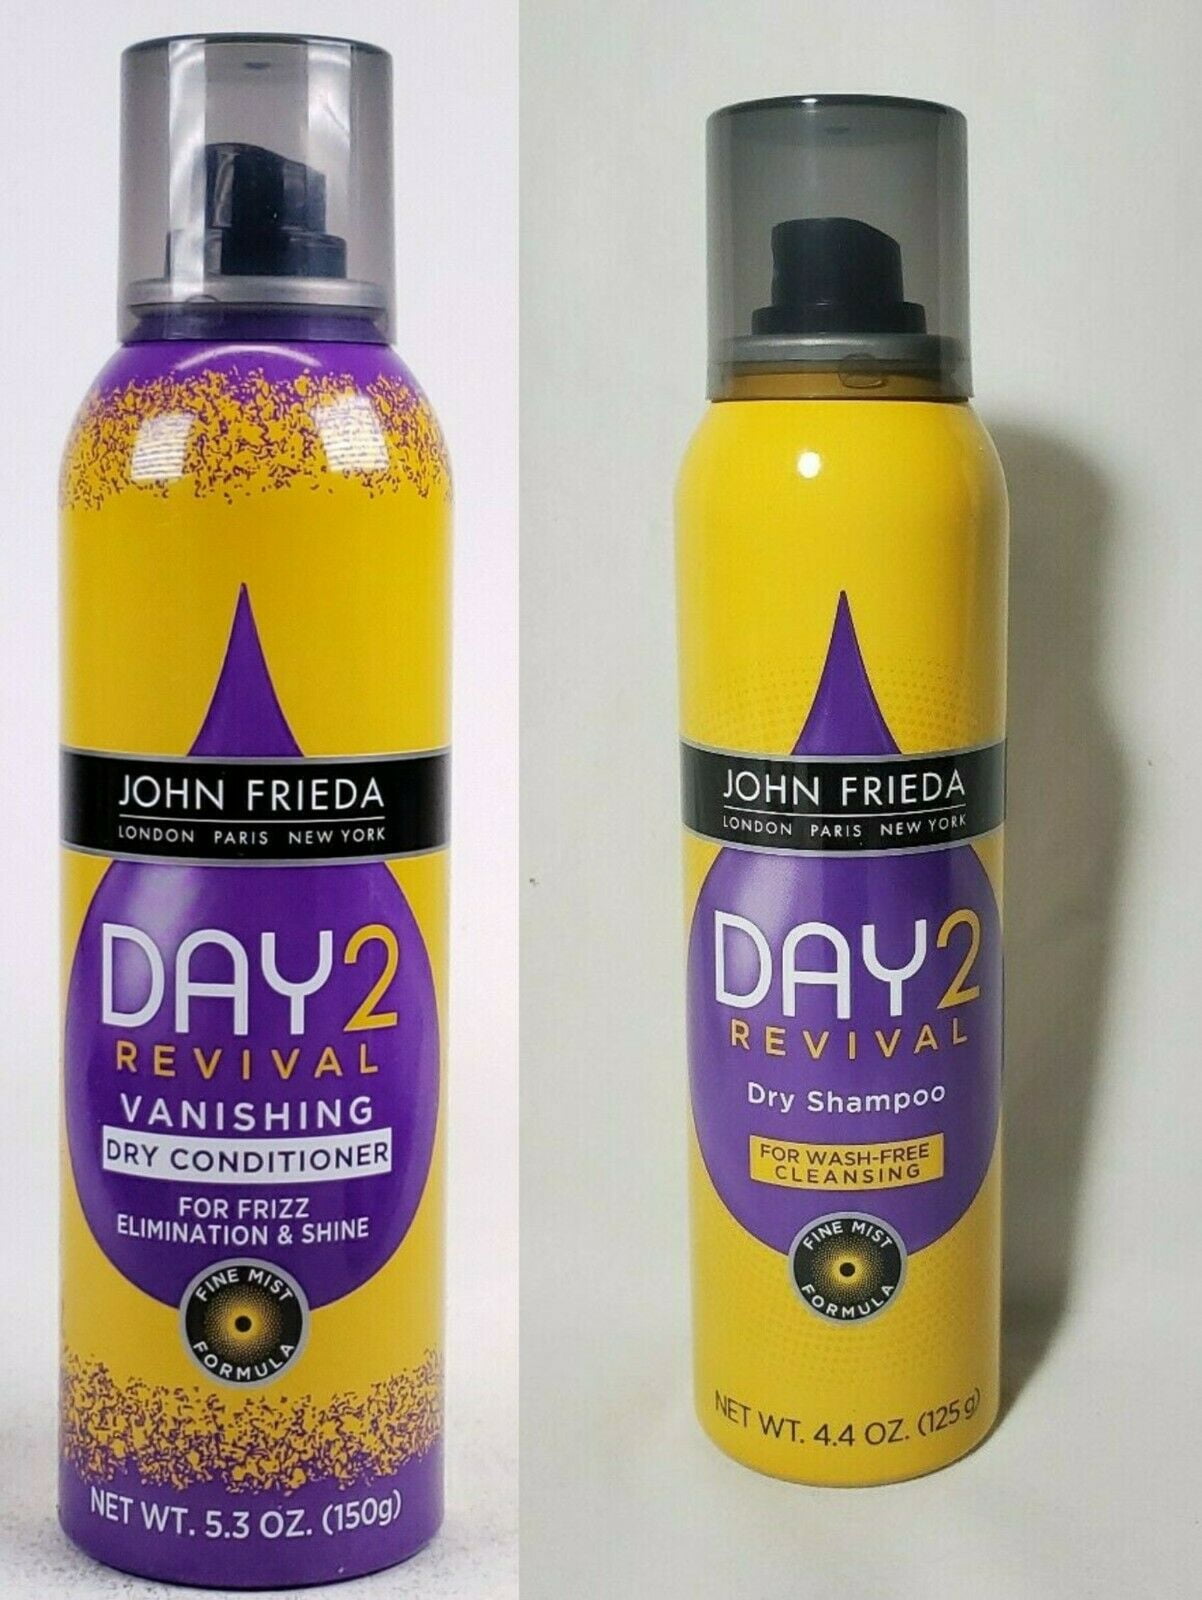 John Frieda Day 2 Revival Dry Conditioner Shampoo Set UsedHair without  Washing, Remove Unwanted Oils, Texturizing Fine Mist Spray 